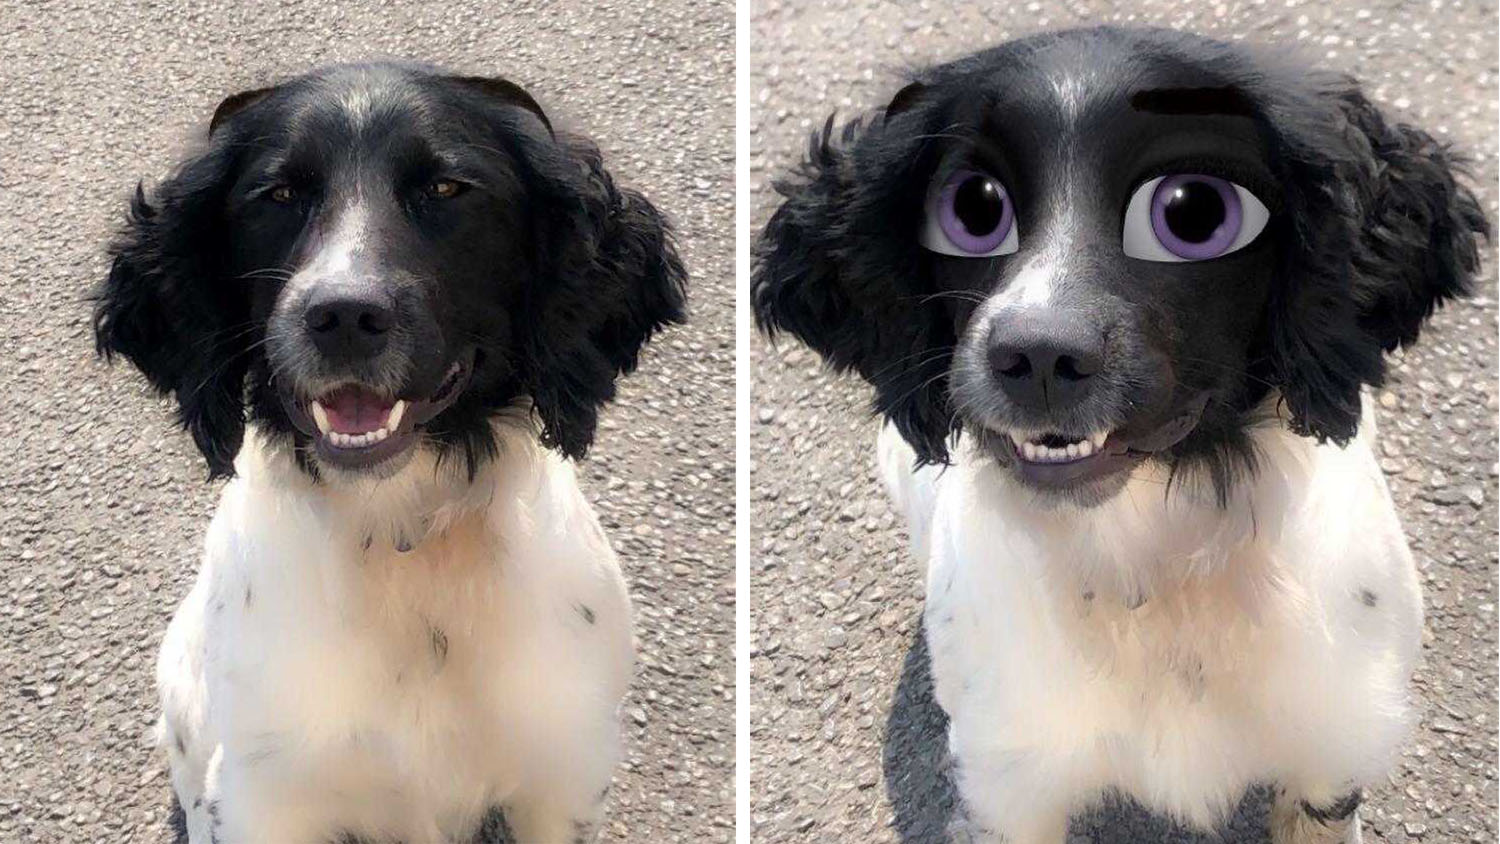 New Snapchat filter turns pet dogs into Disney characters